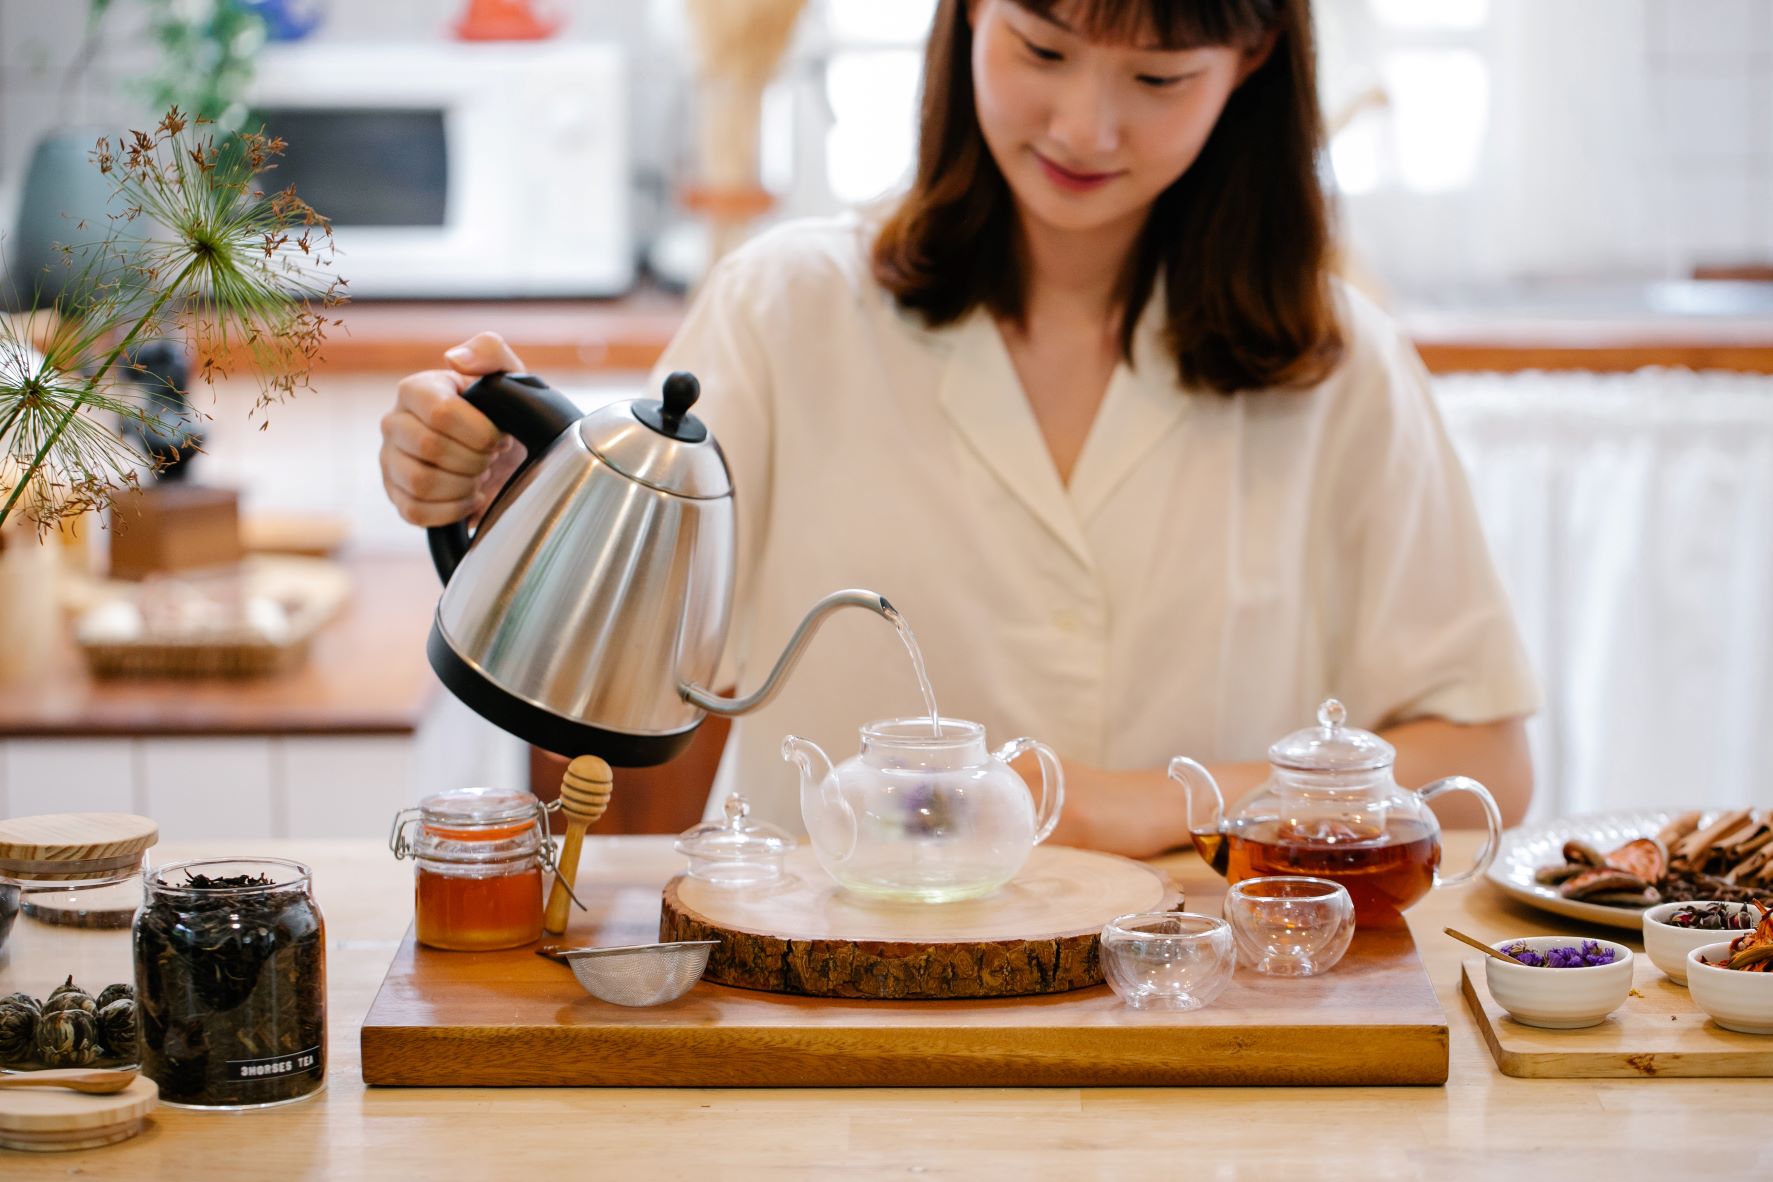 How To Make Tea With A Tea Kettle